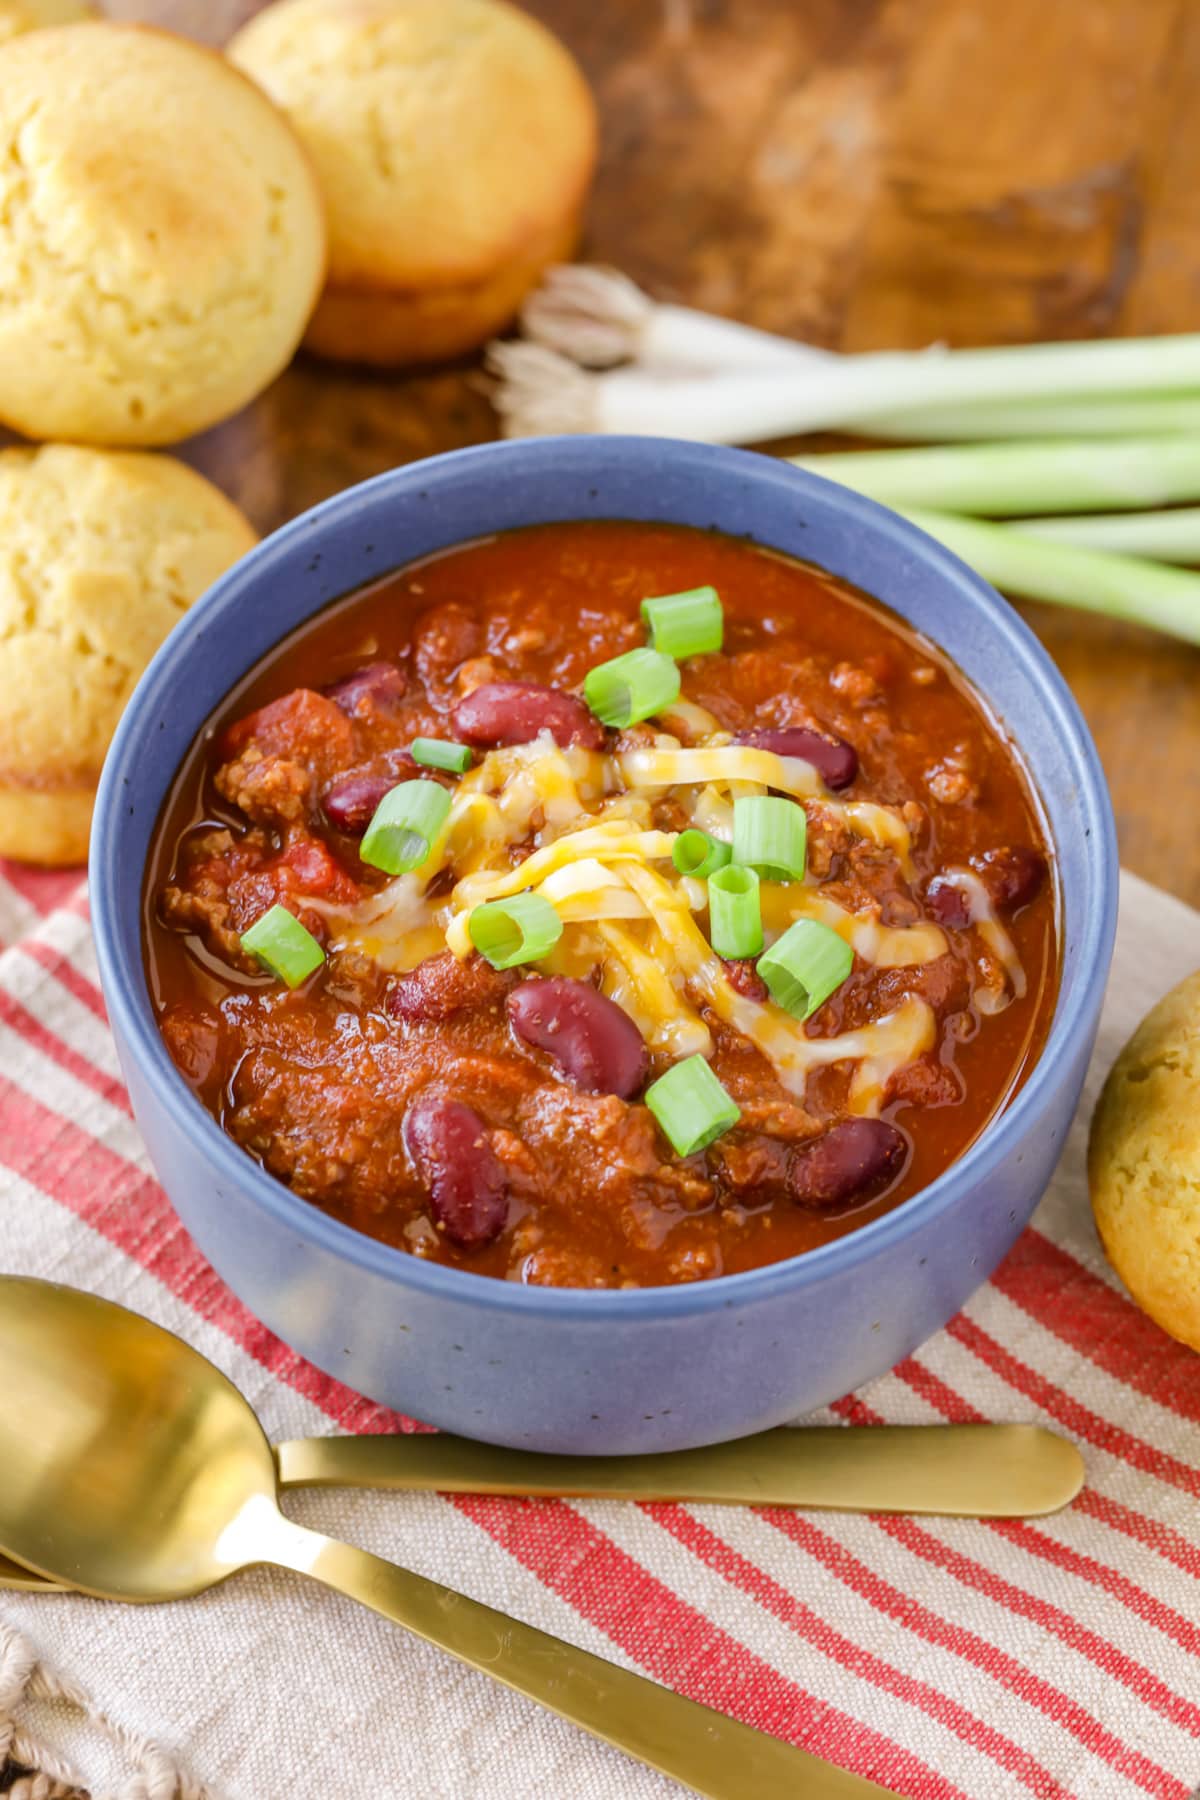 Our go-to chili recipe topped with shredded cheese and green onions.